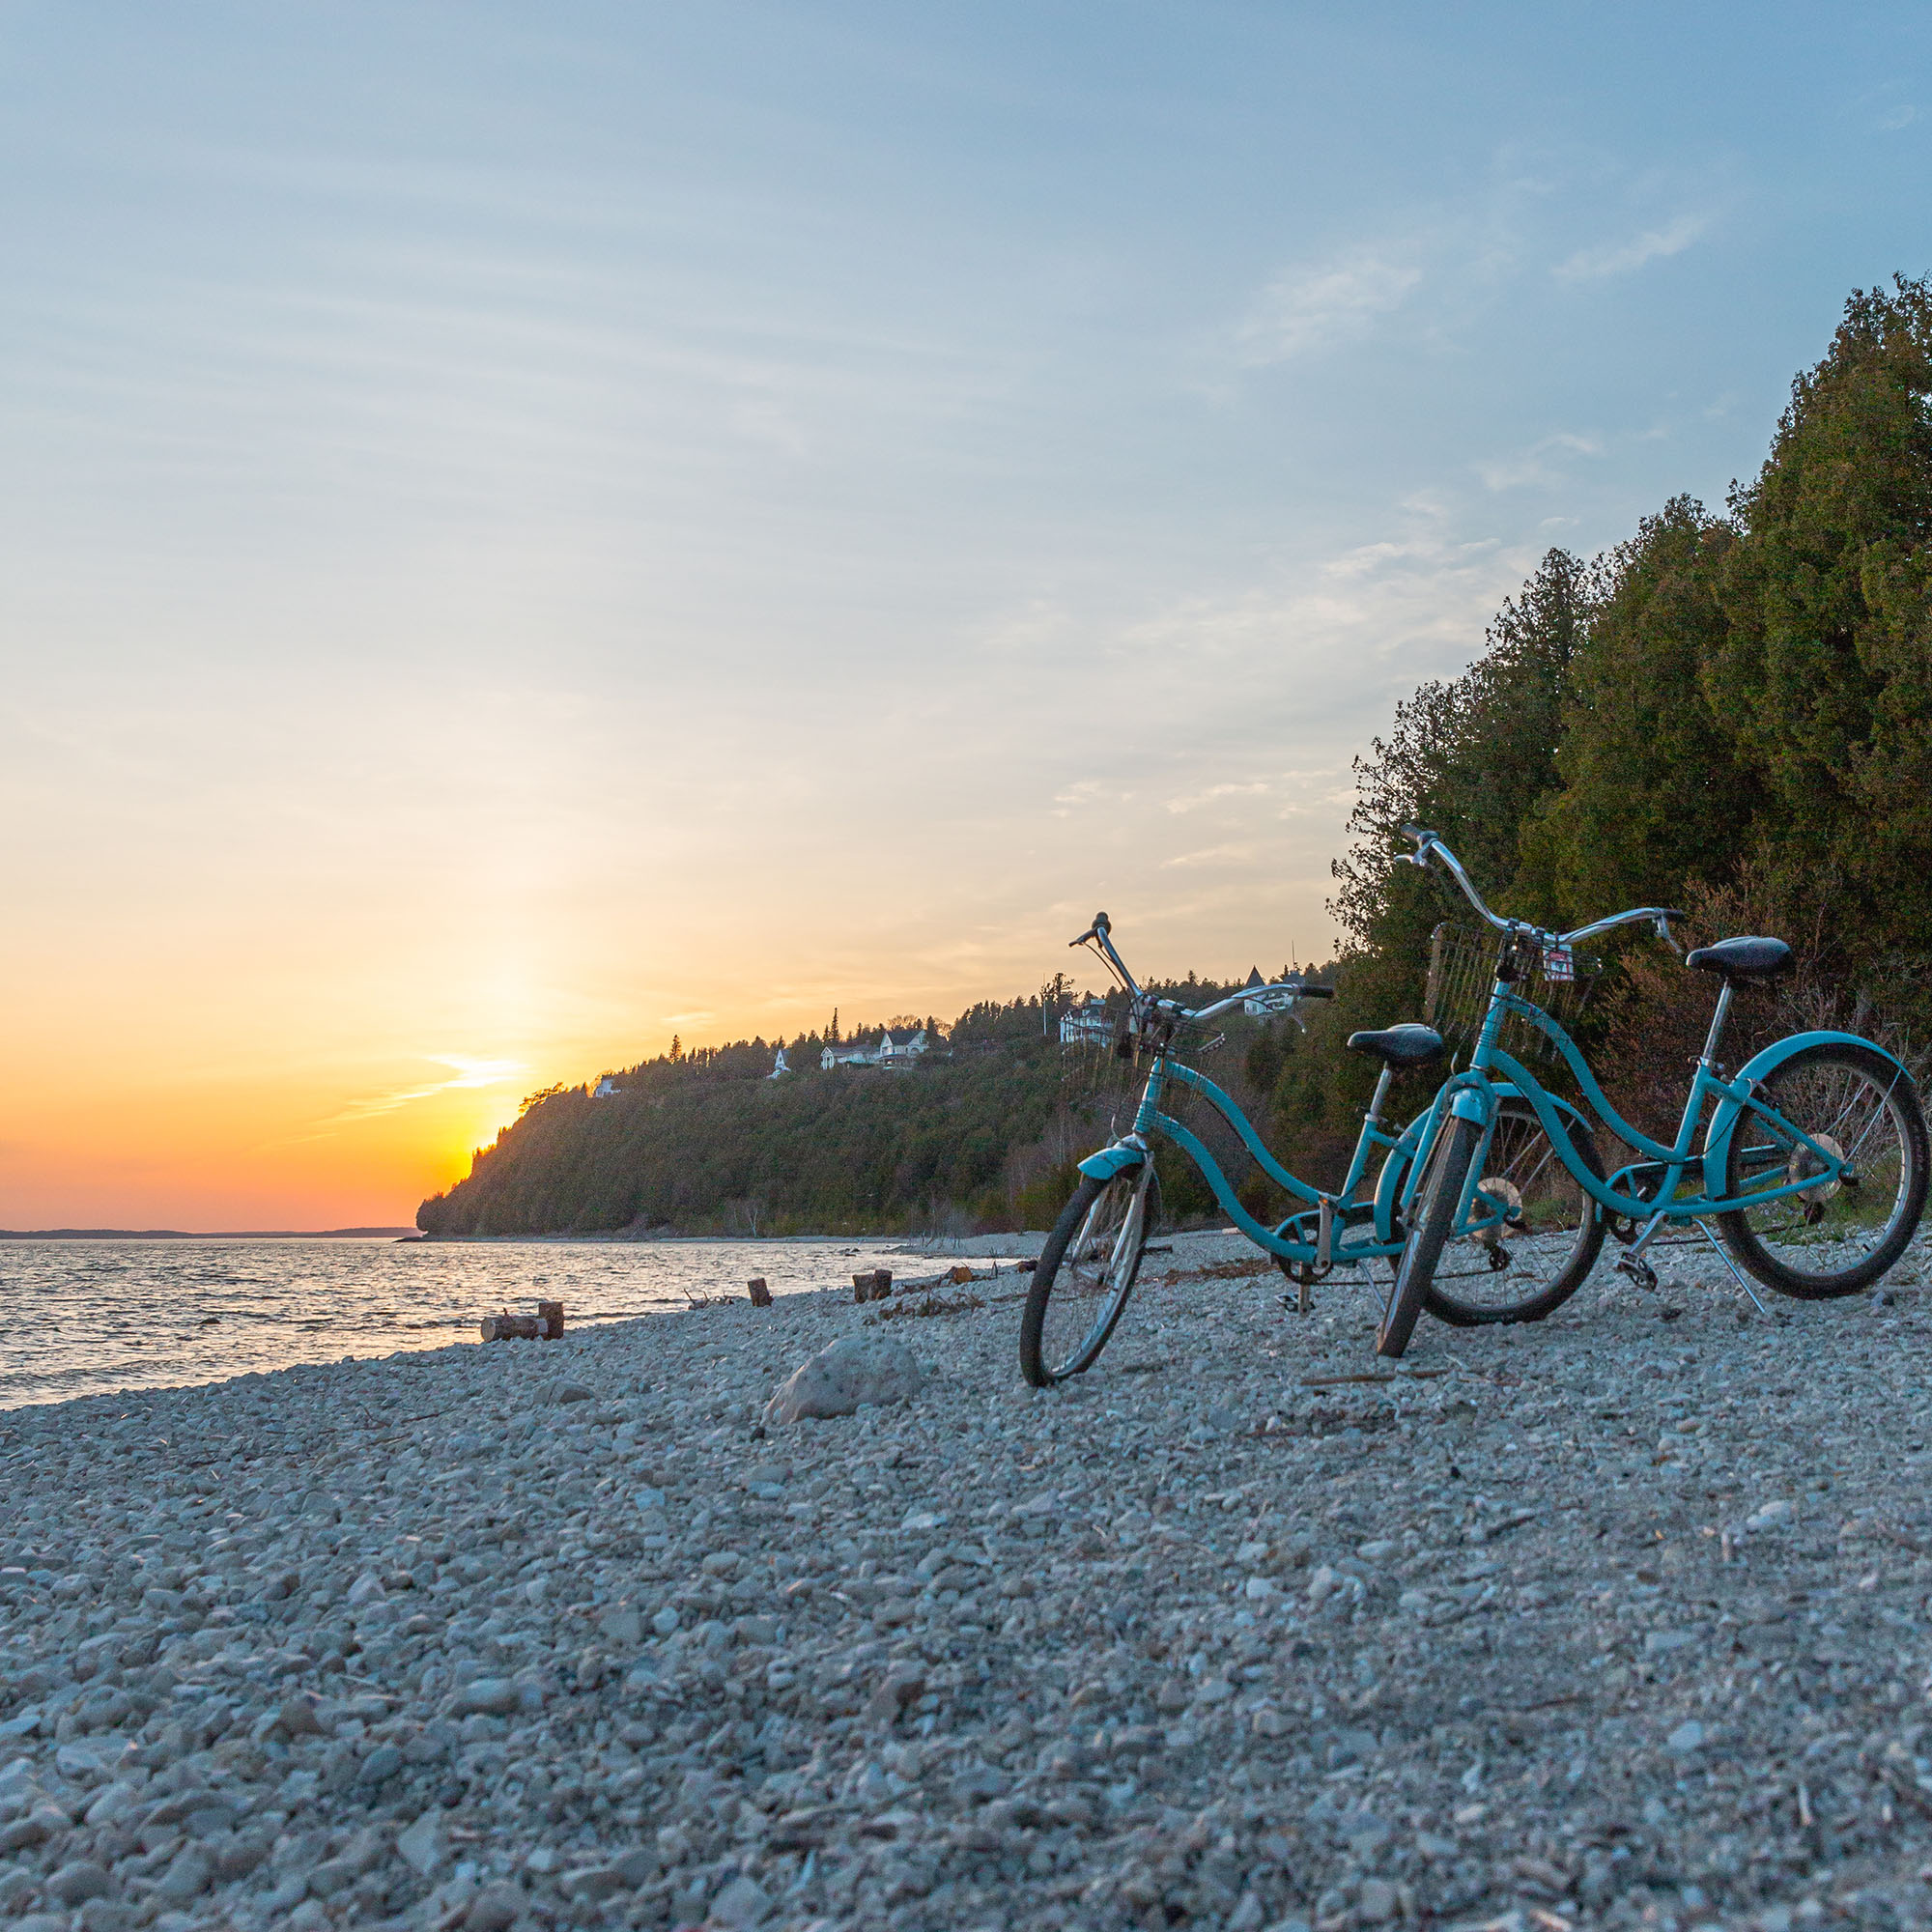 mackinac island sunset with two blue bikes on the beach